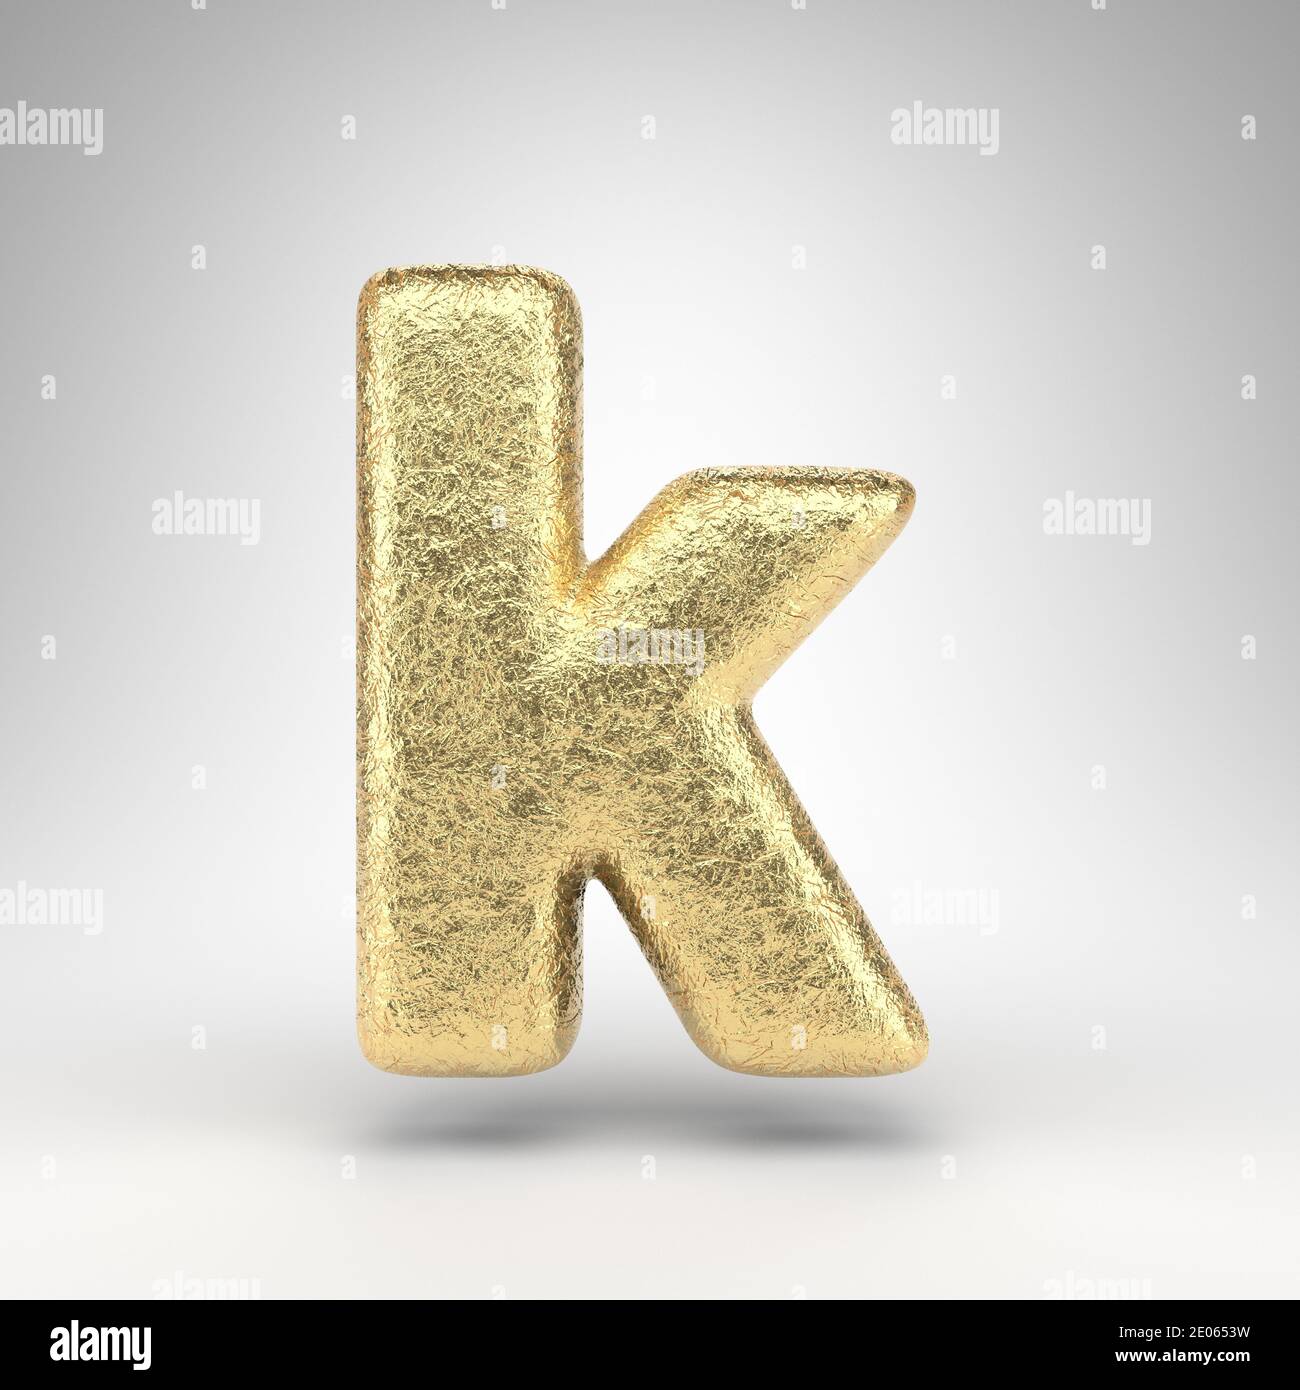 Letter K lowercase on white background. Creased golden foil 3D rendered font with gloss metal texture. Stock Photo